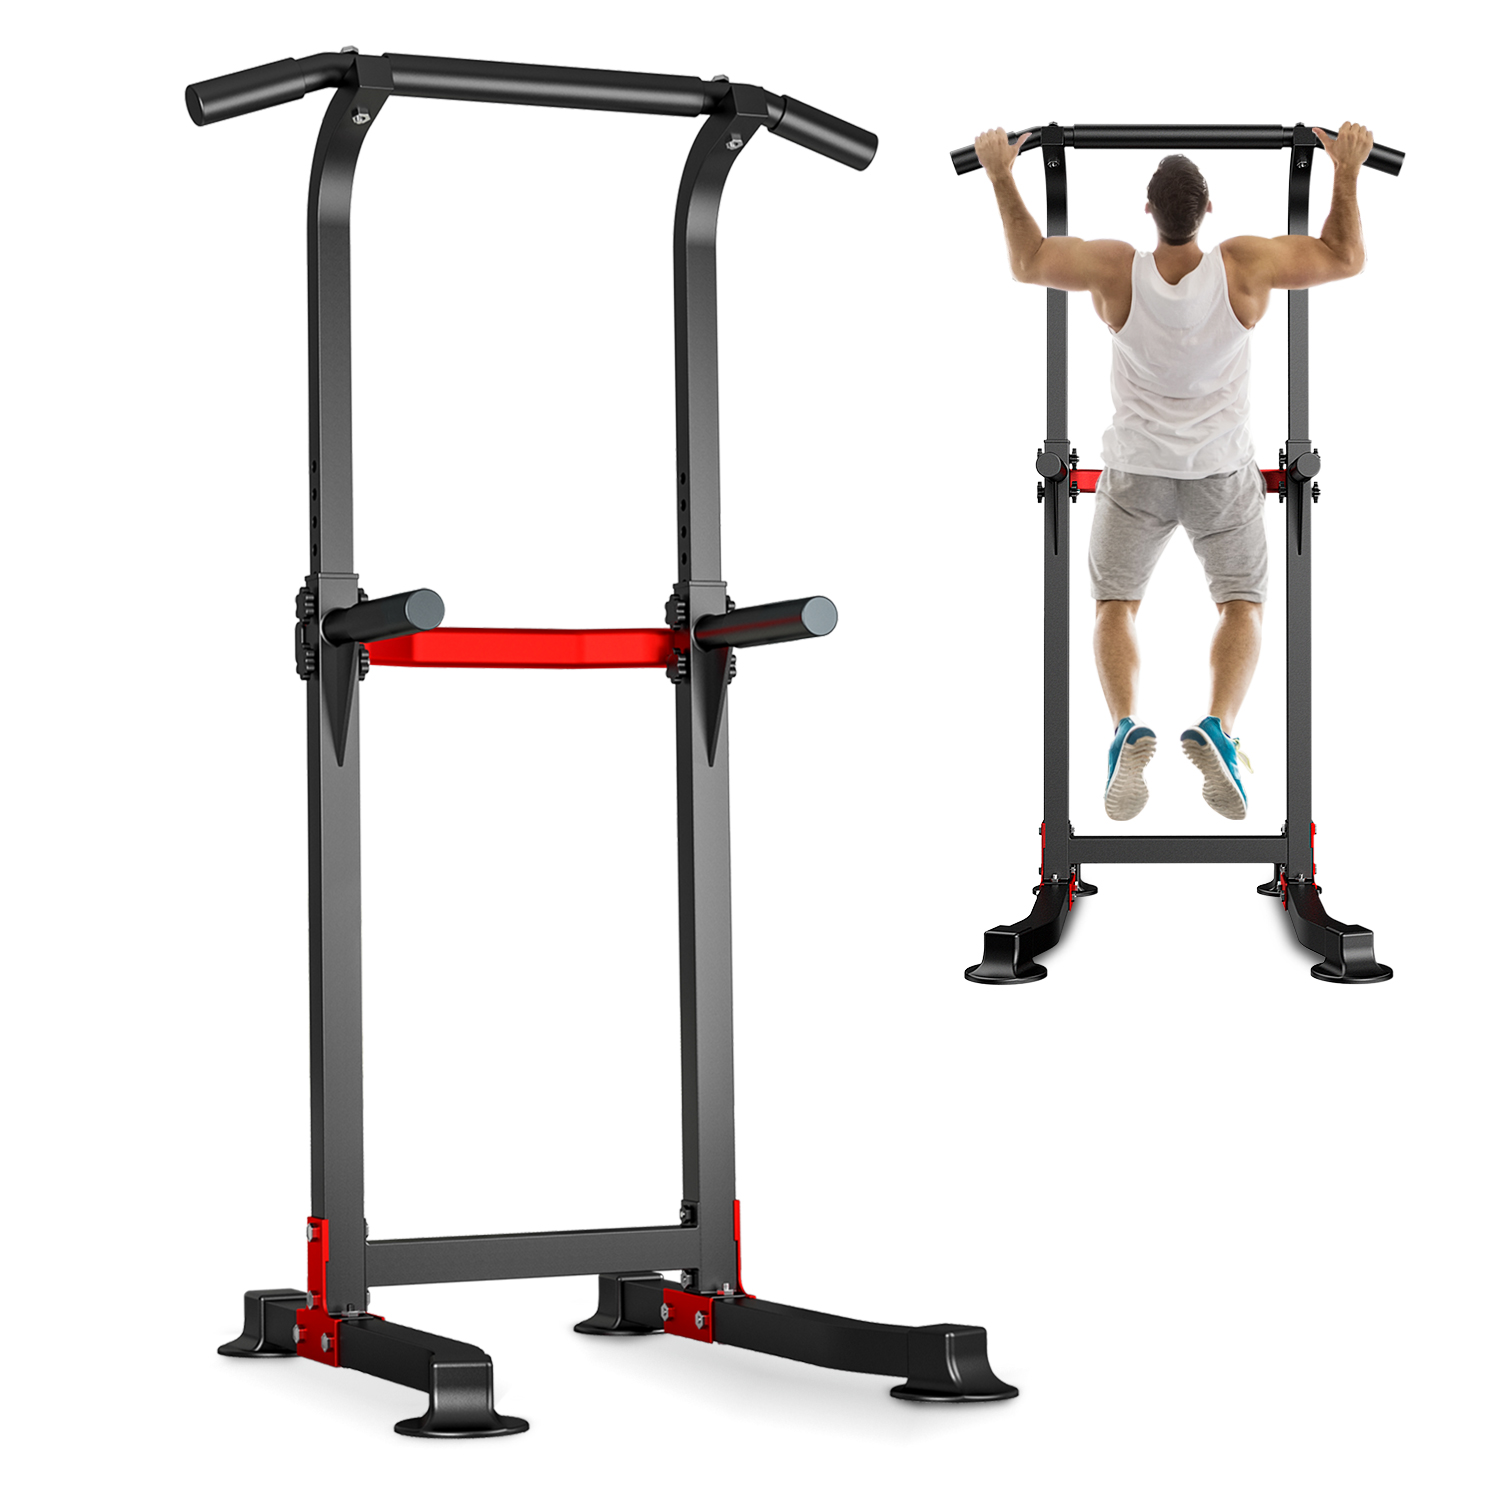 Ainfox Power Tower Pull Up Bar, Pull Up Bar Station Workout Dip Station Height Adjustable Strength Training Equipment For Fitness For Home 330 Weight Capacity - image 1 of 8